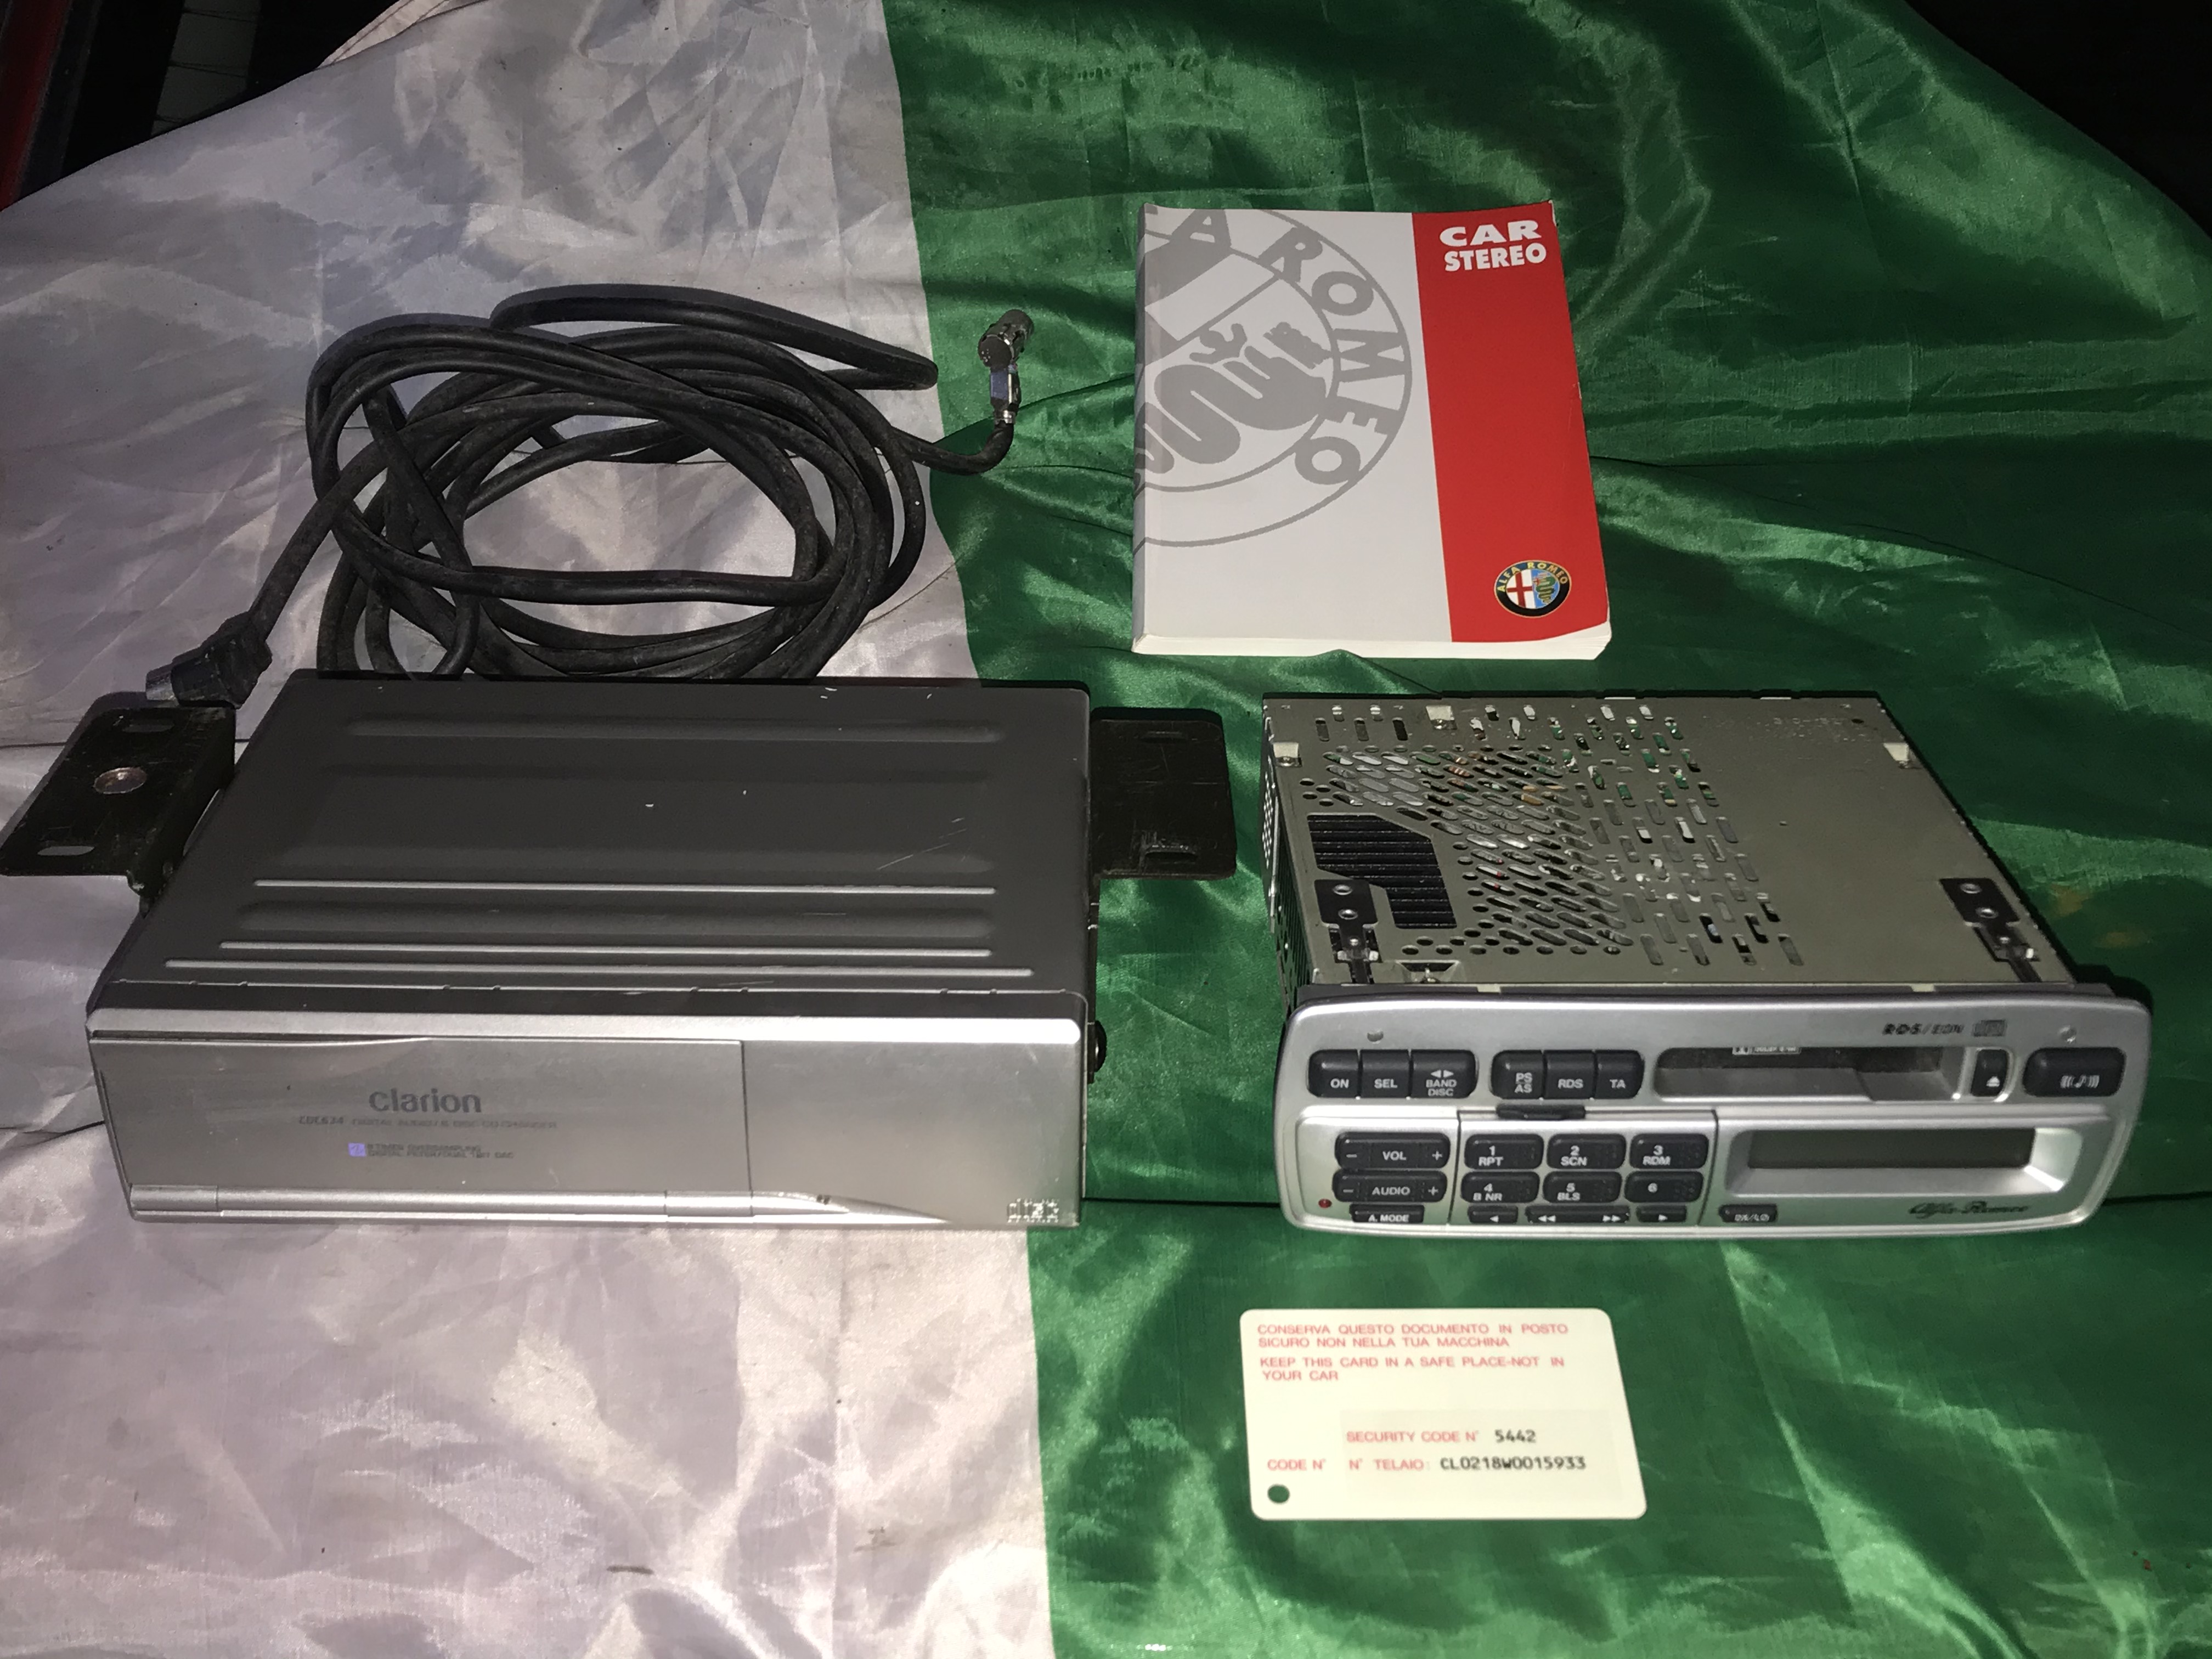 1998-2003 Alfa Romeo GTV & Spider 916 Original OEM Clarion Radio Stereo Silver Head Unit for Phase 2 Model Cars With CD Changer and User Manual